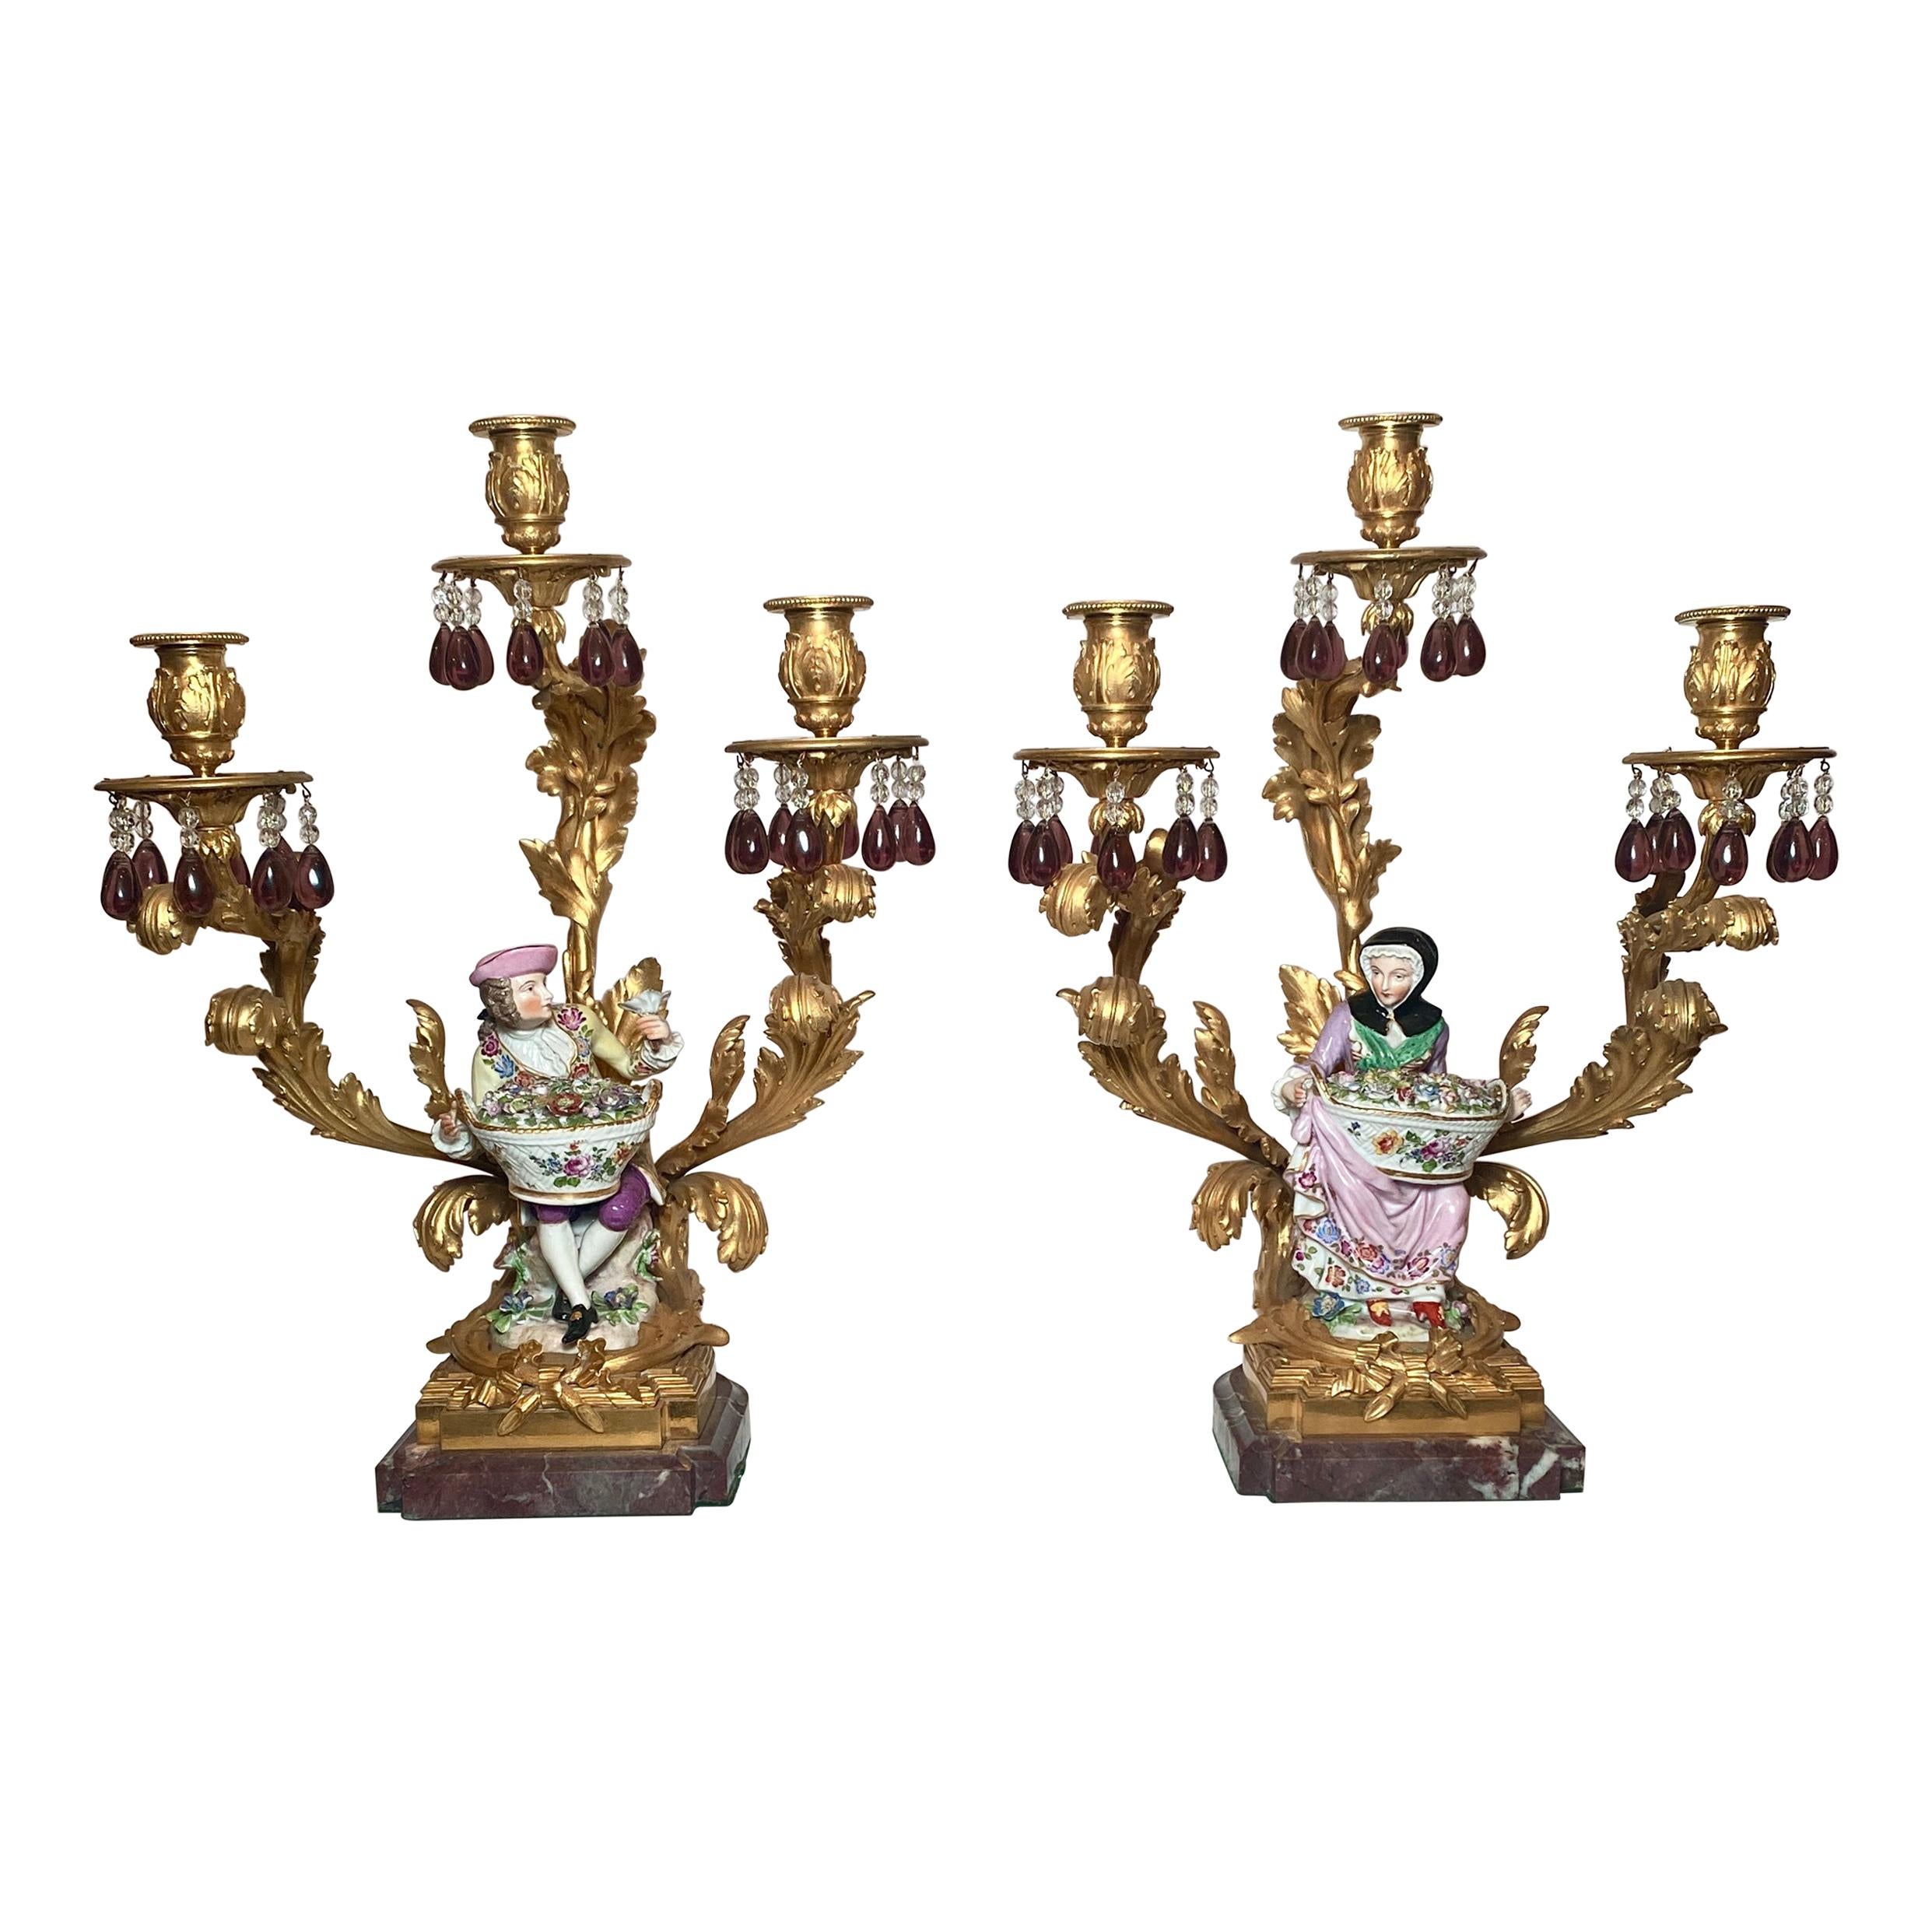 Pair of Antique 19th Century Gold Bronze and Porcelain Candelabra